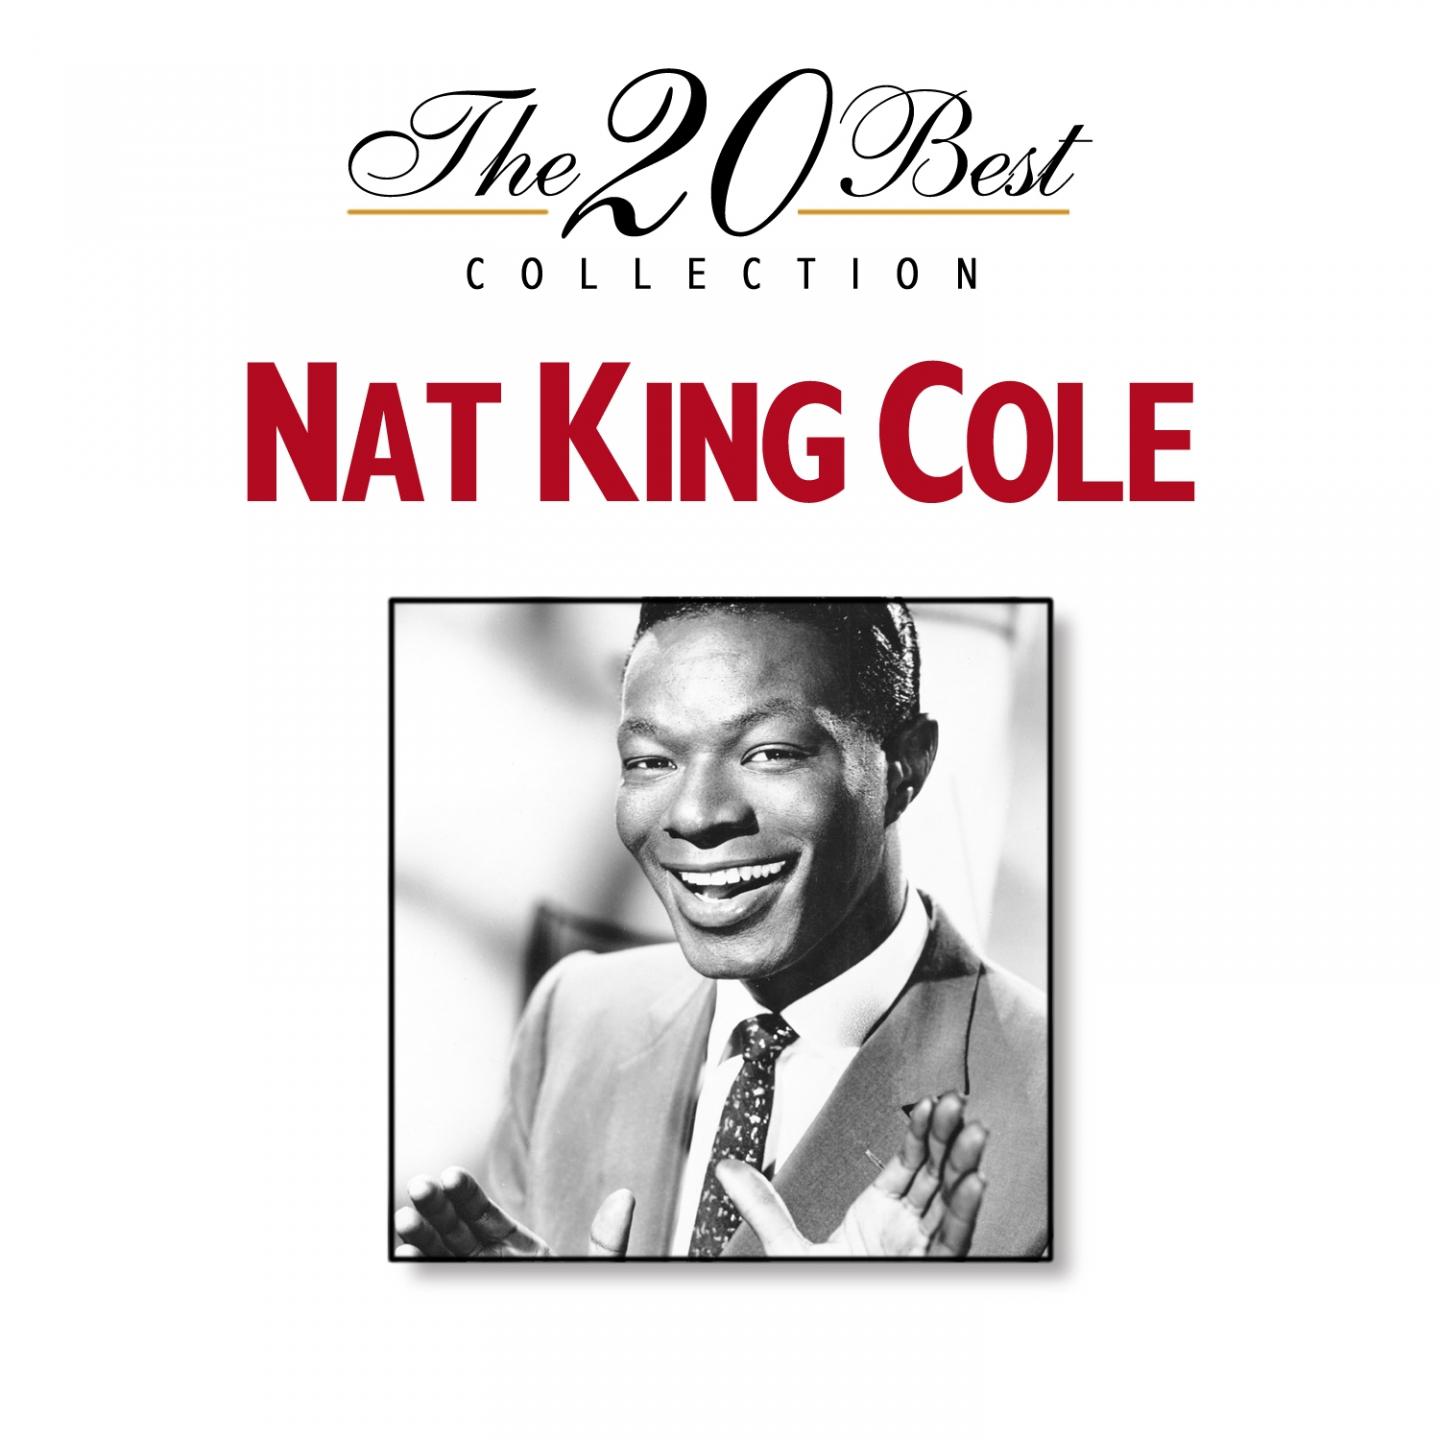 The 20 Best Collection: Nat King Cole